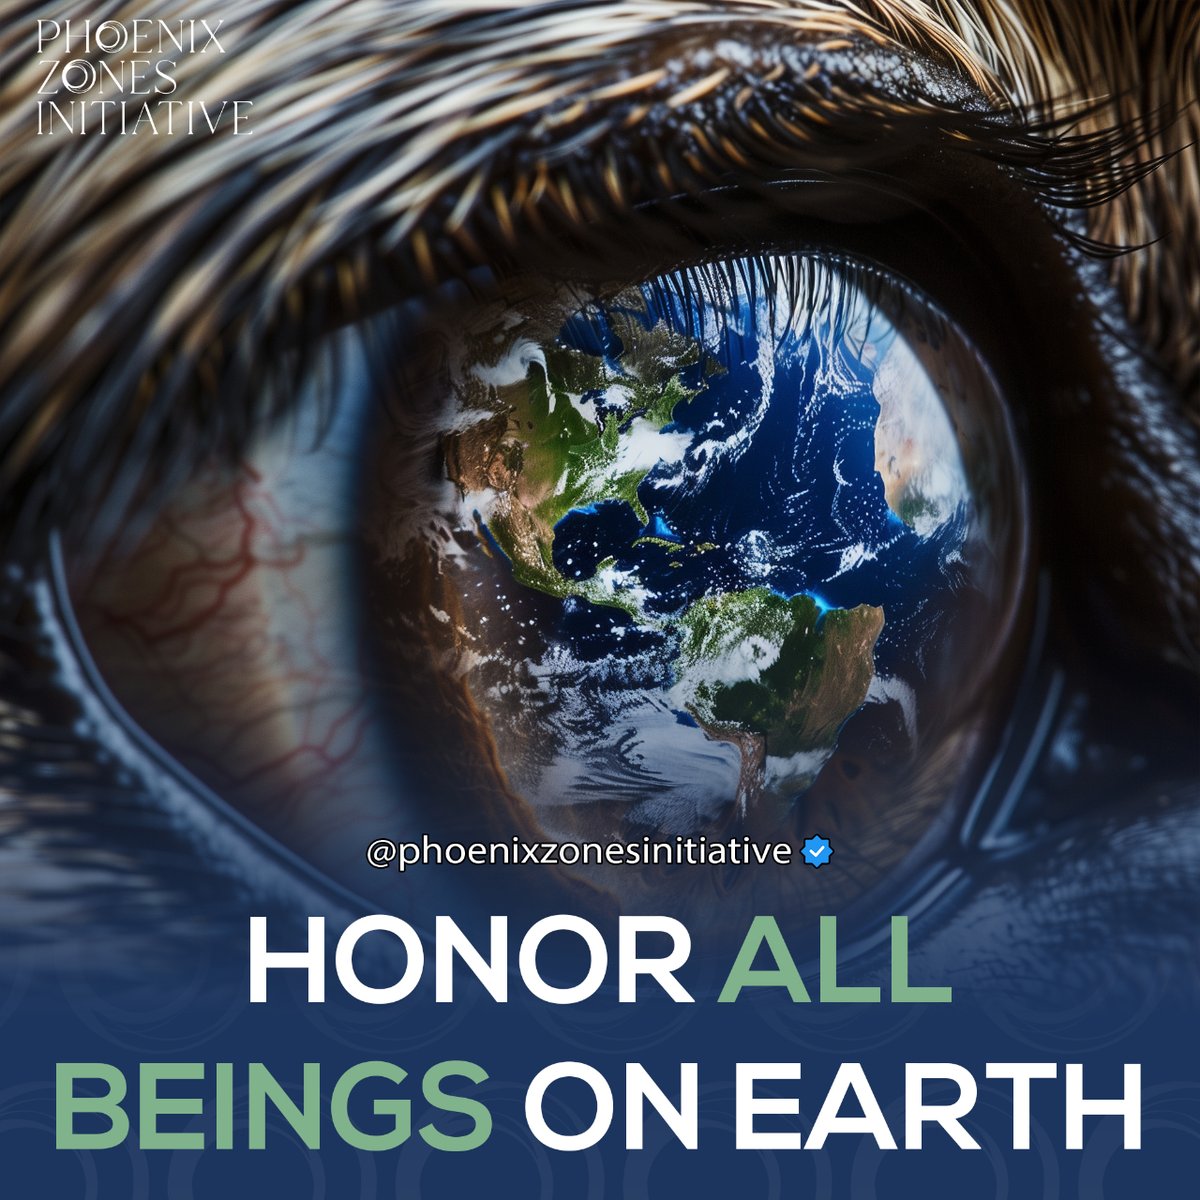 👁️Gazing into nature’s eye, we see our planet's soul—Phoenix Zones Initiative honors every life, as we all play a role. 🌏

Learn more at phoneixzonesinitiative.org

#globalwellbeing #animalhealth #humanhealth